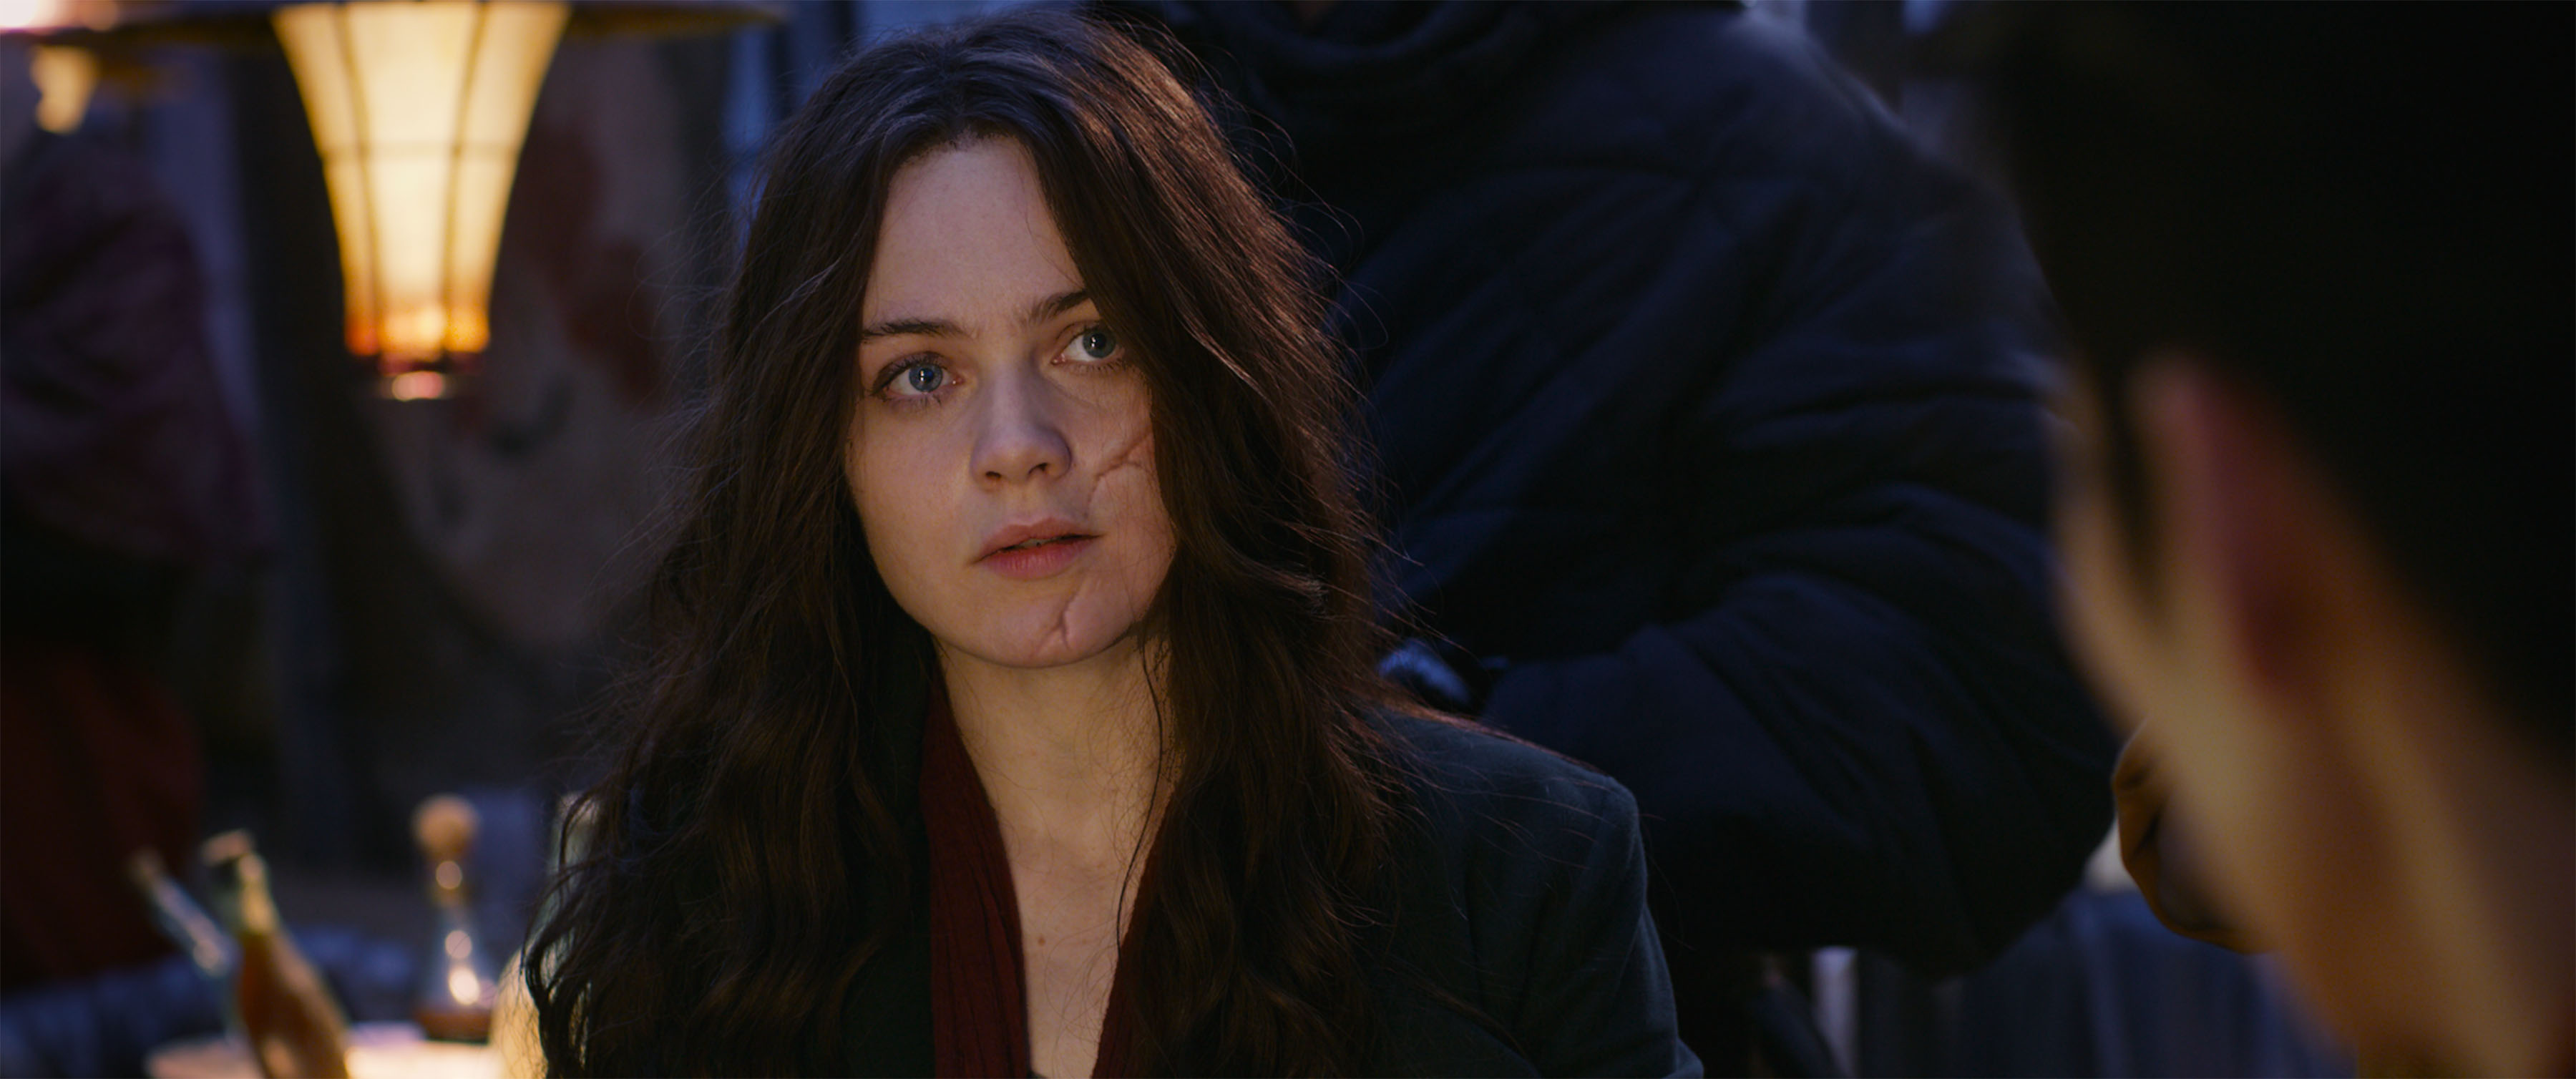 Mortal Engines still (Universal Pictures)